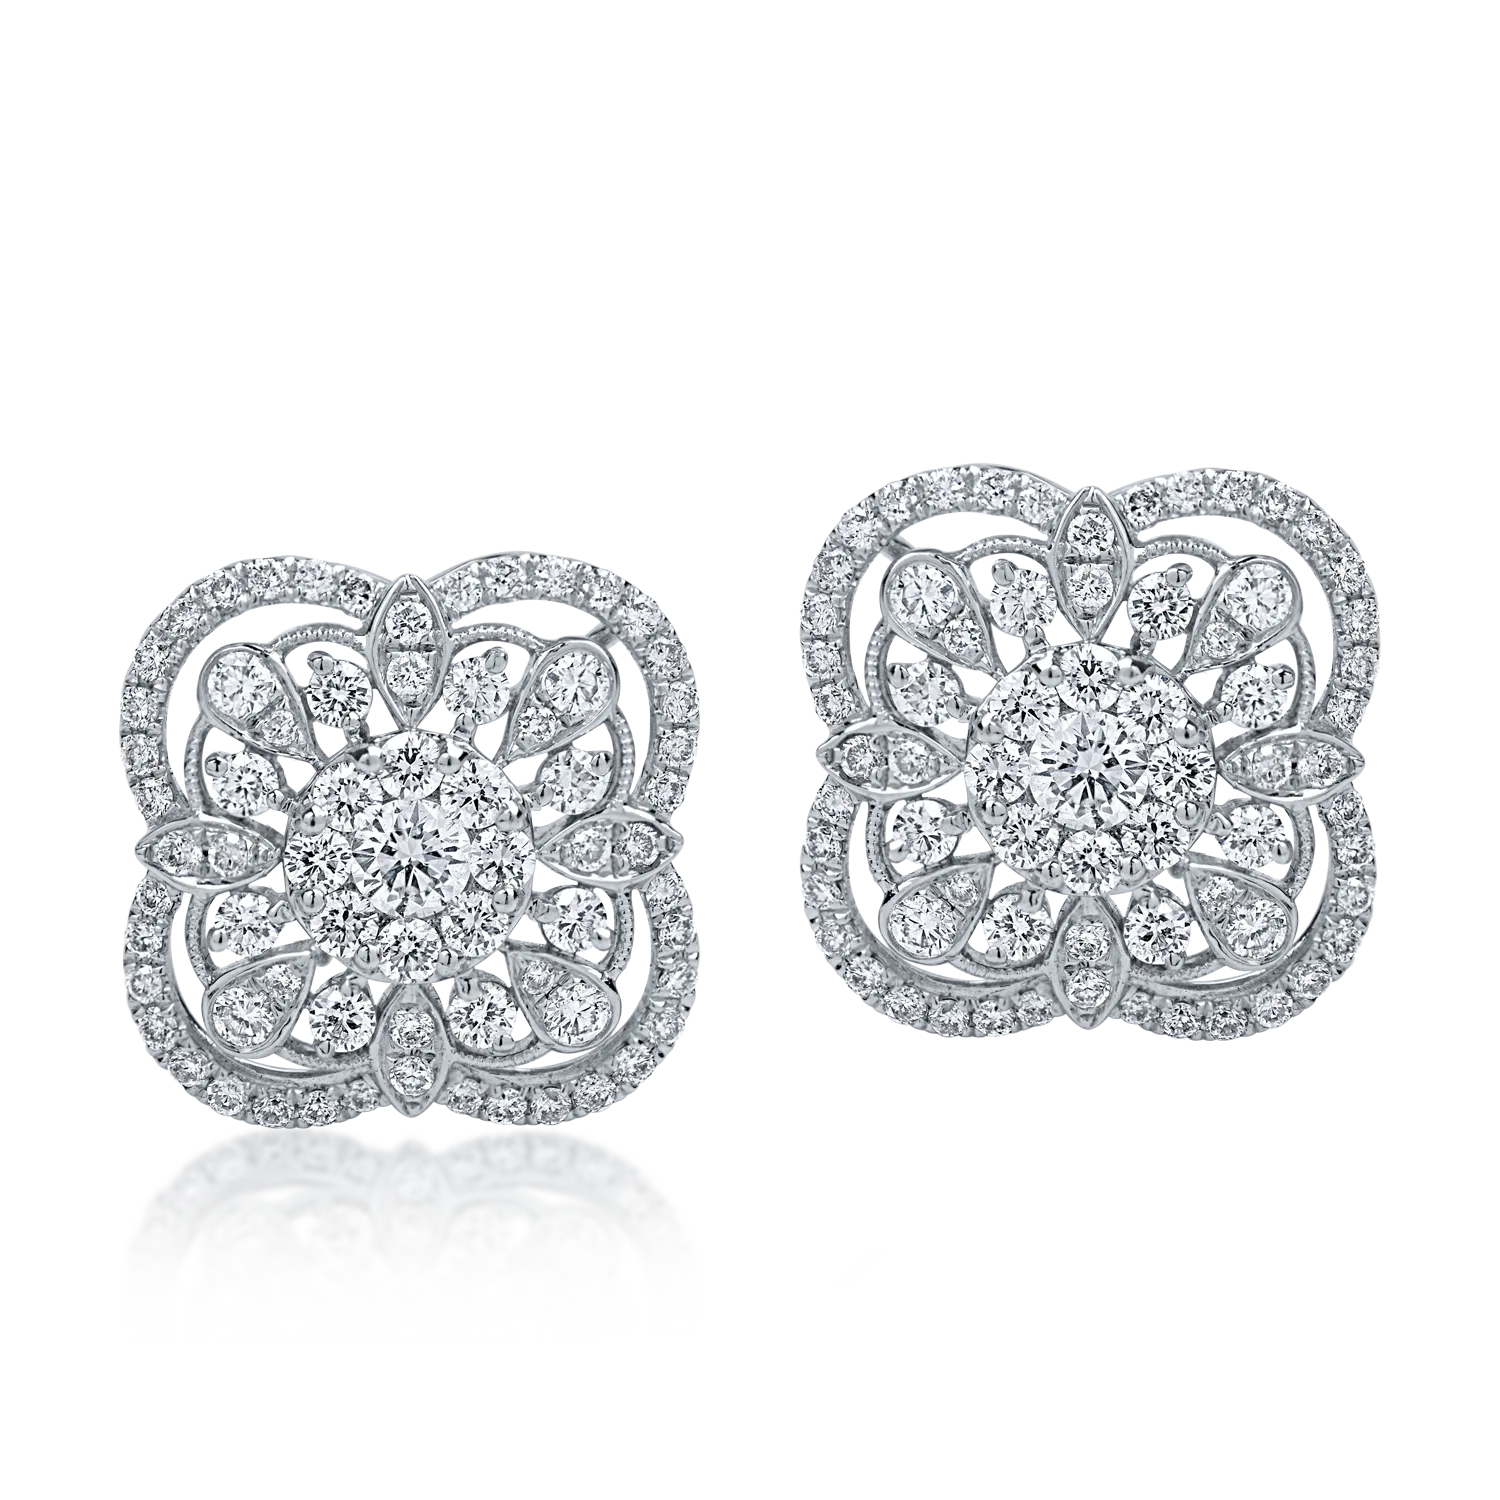 White gold earrings with 1.86ct diamonds